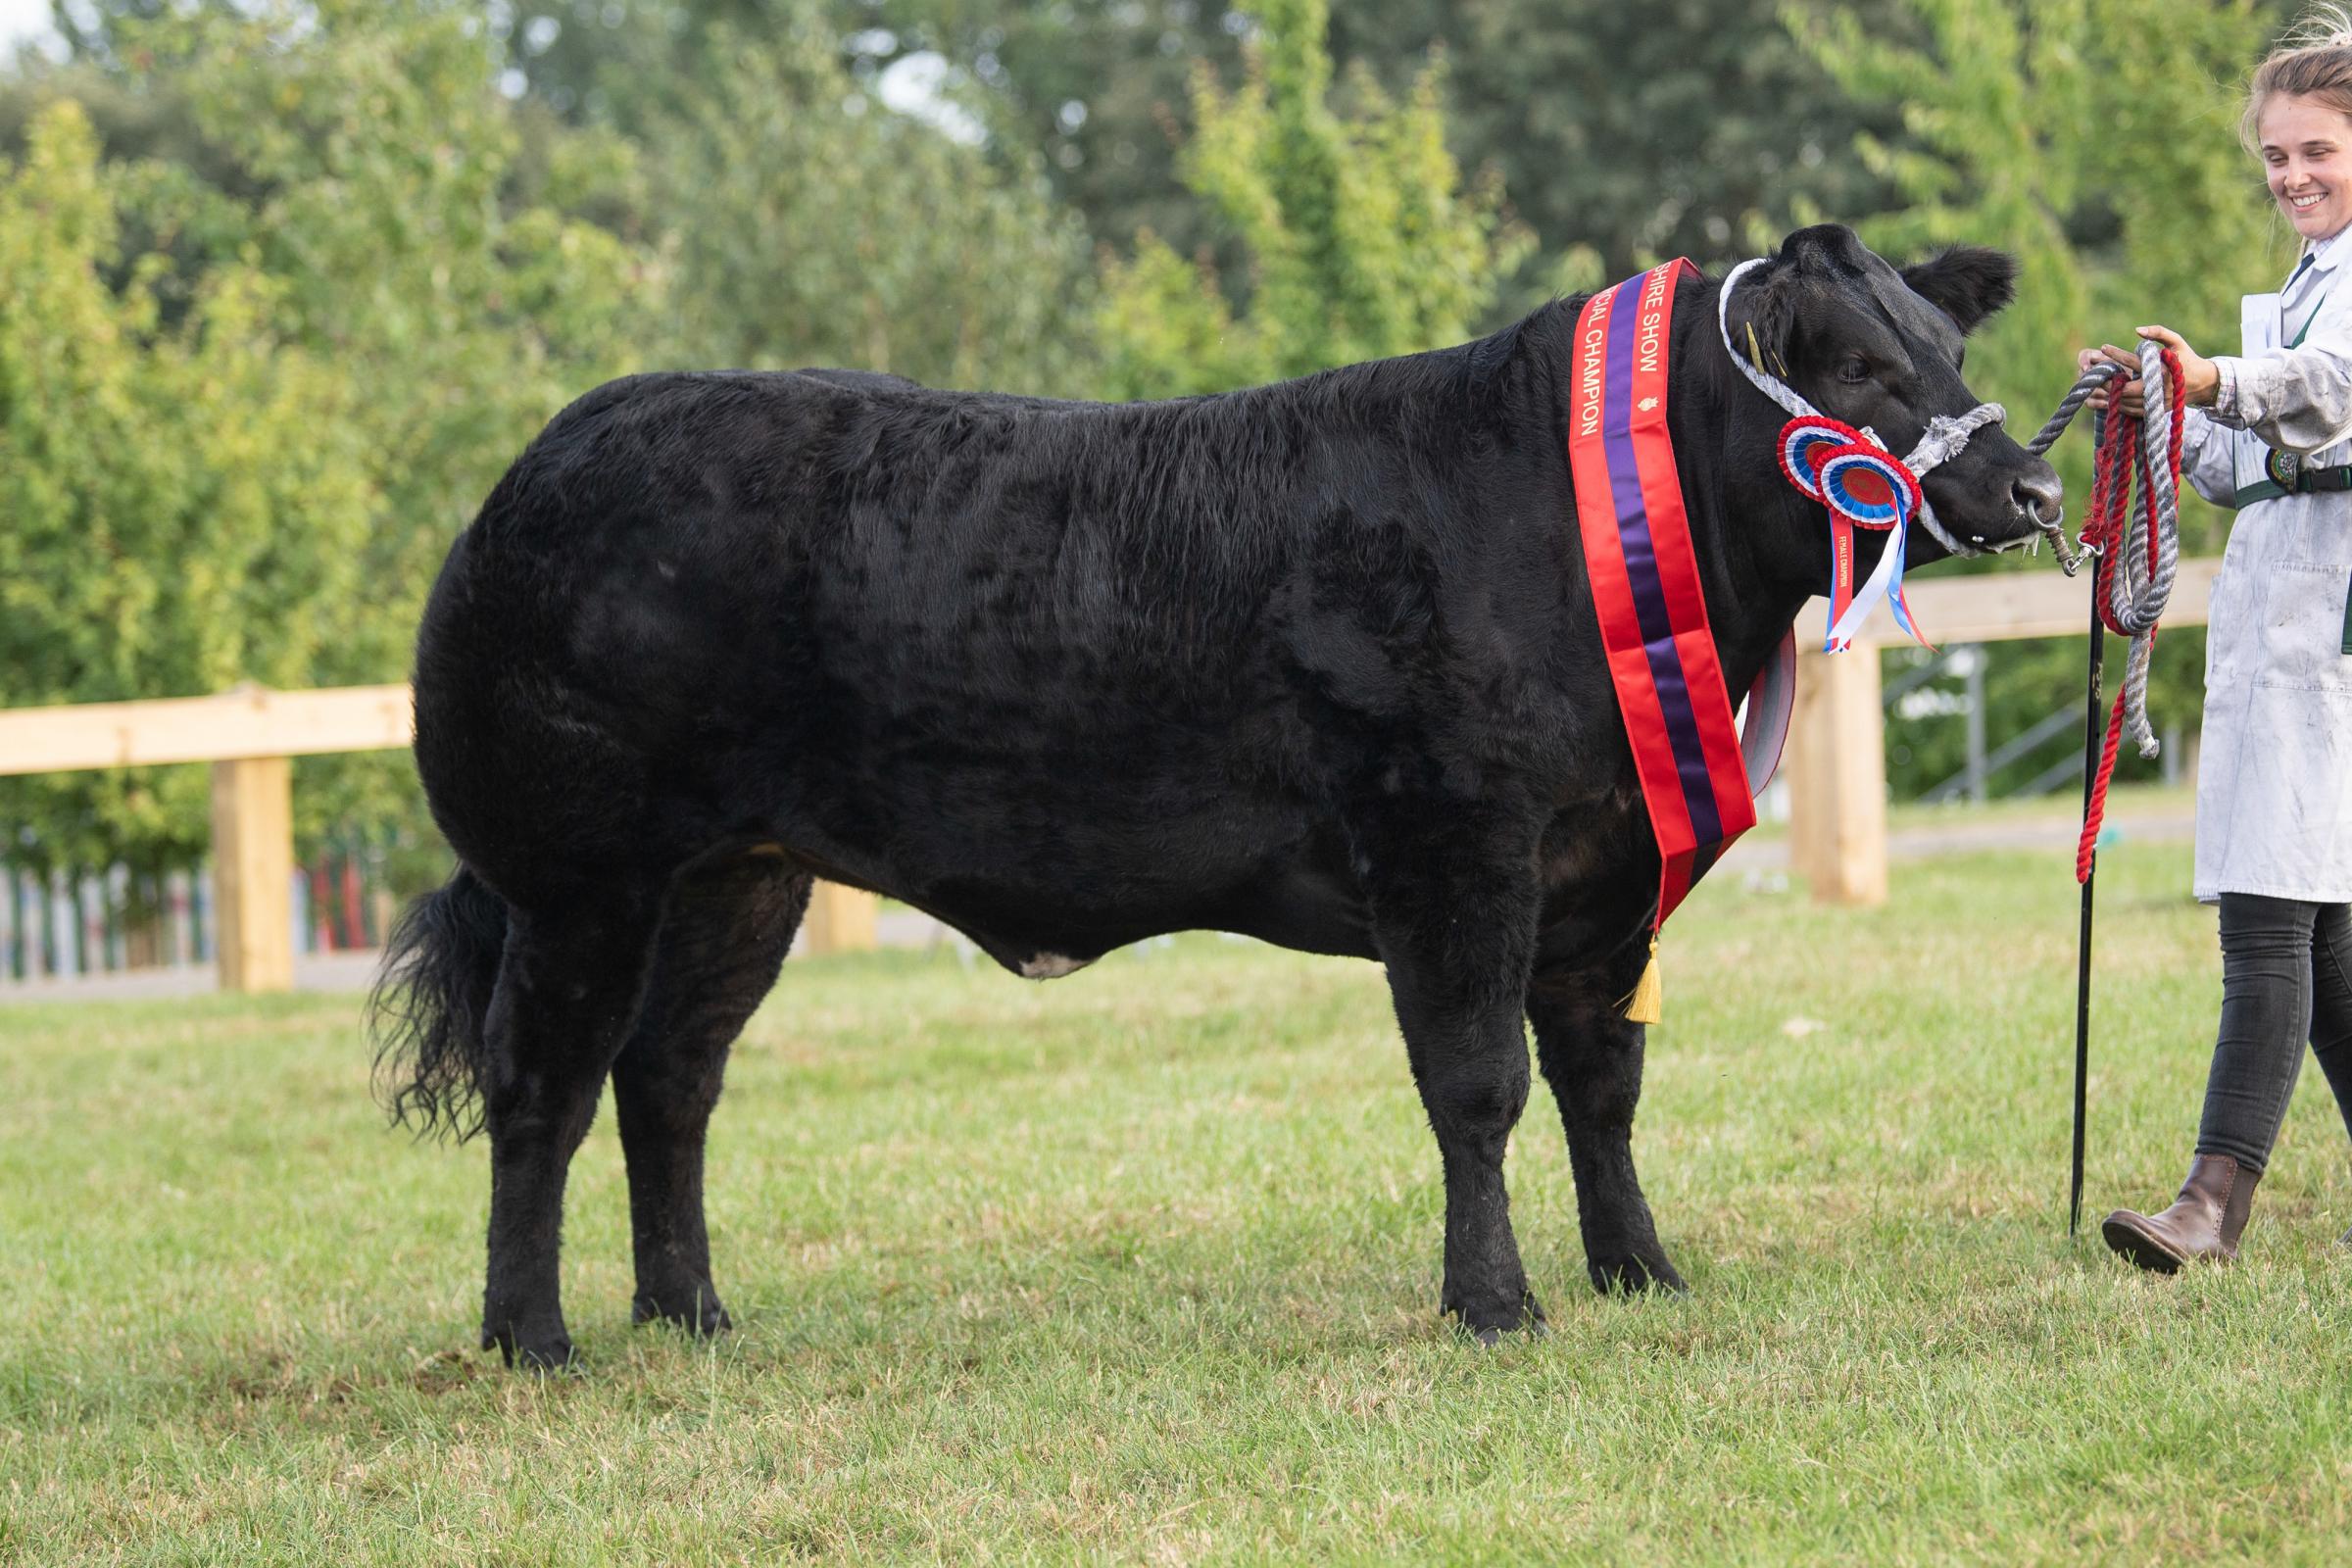 Commercial beef champion was the heifer from Dufton,Small and Wilkinson team     Ref:RH120722123  Rob Haining / The Scottish Farmer...